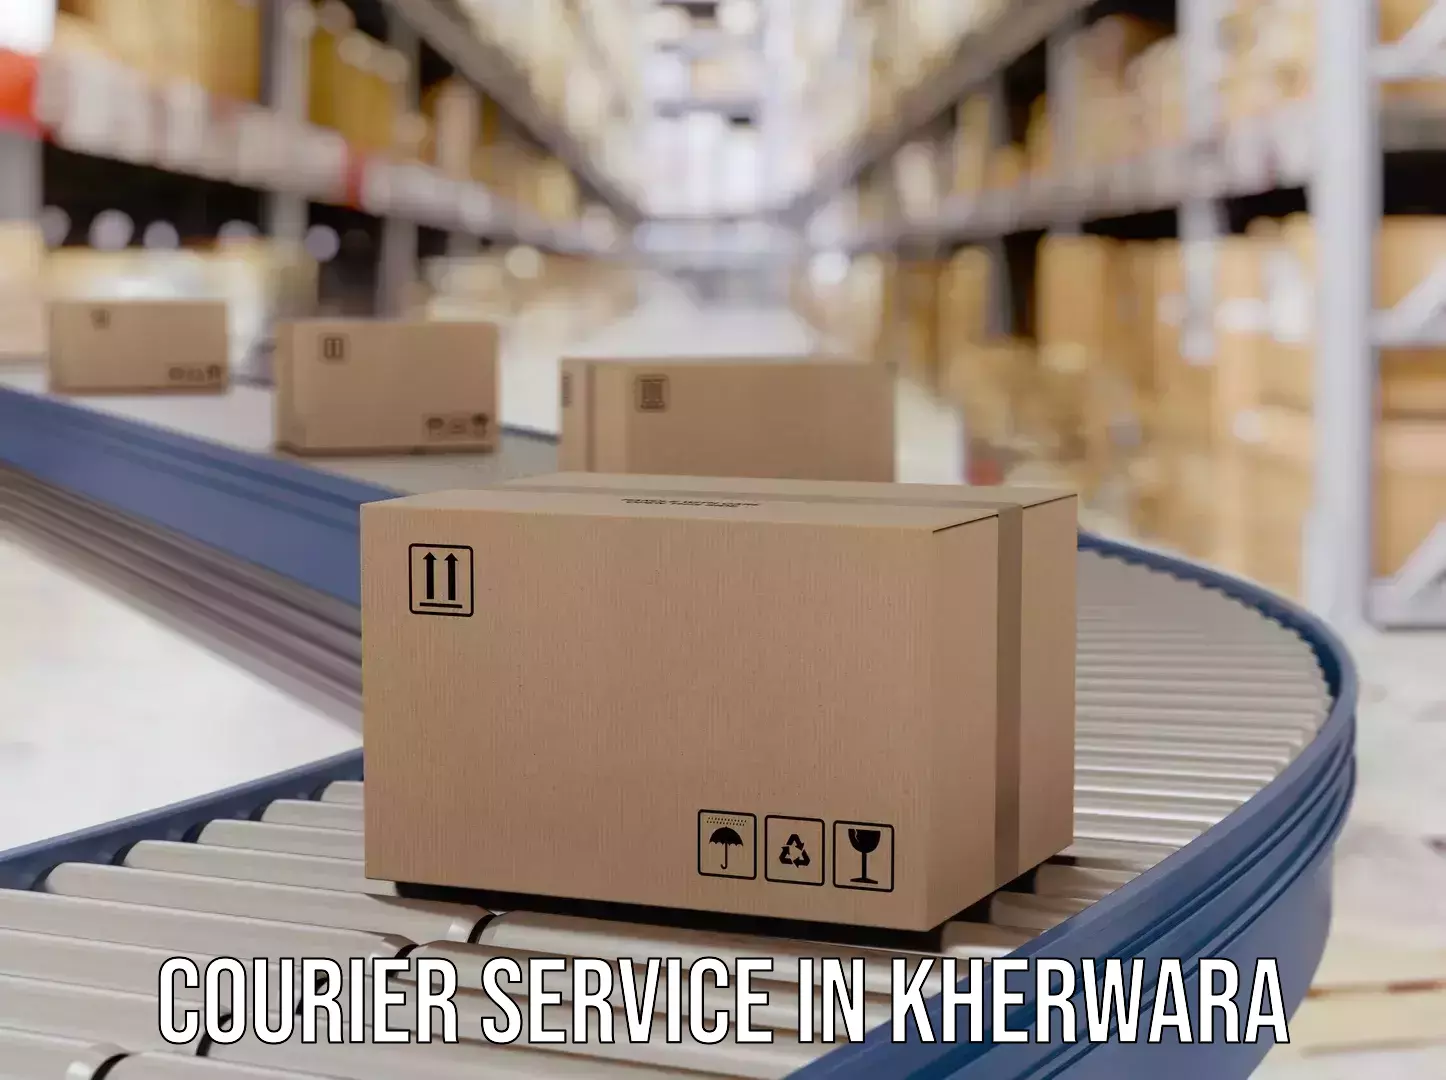 Same-day delivery options in Kherwara